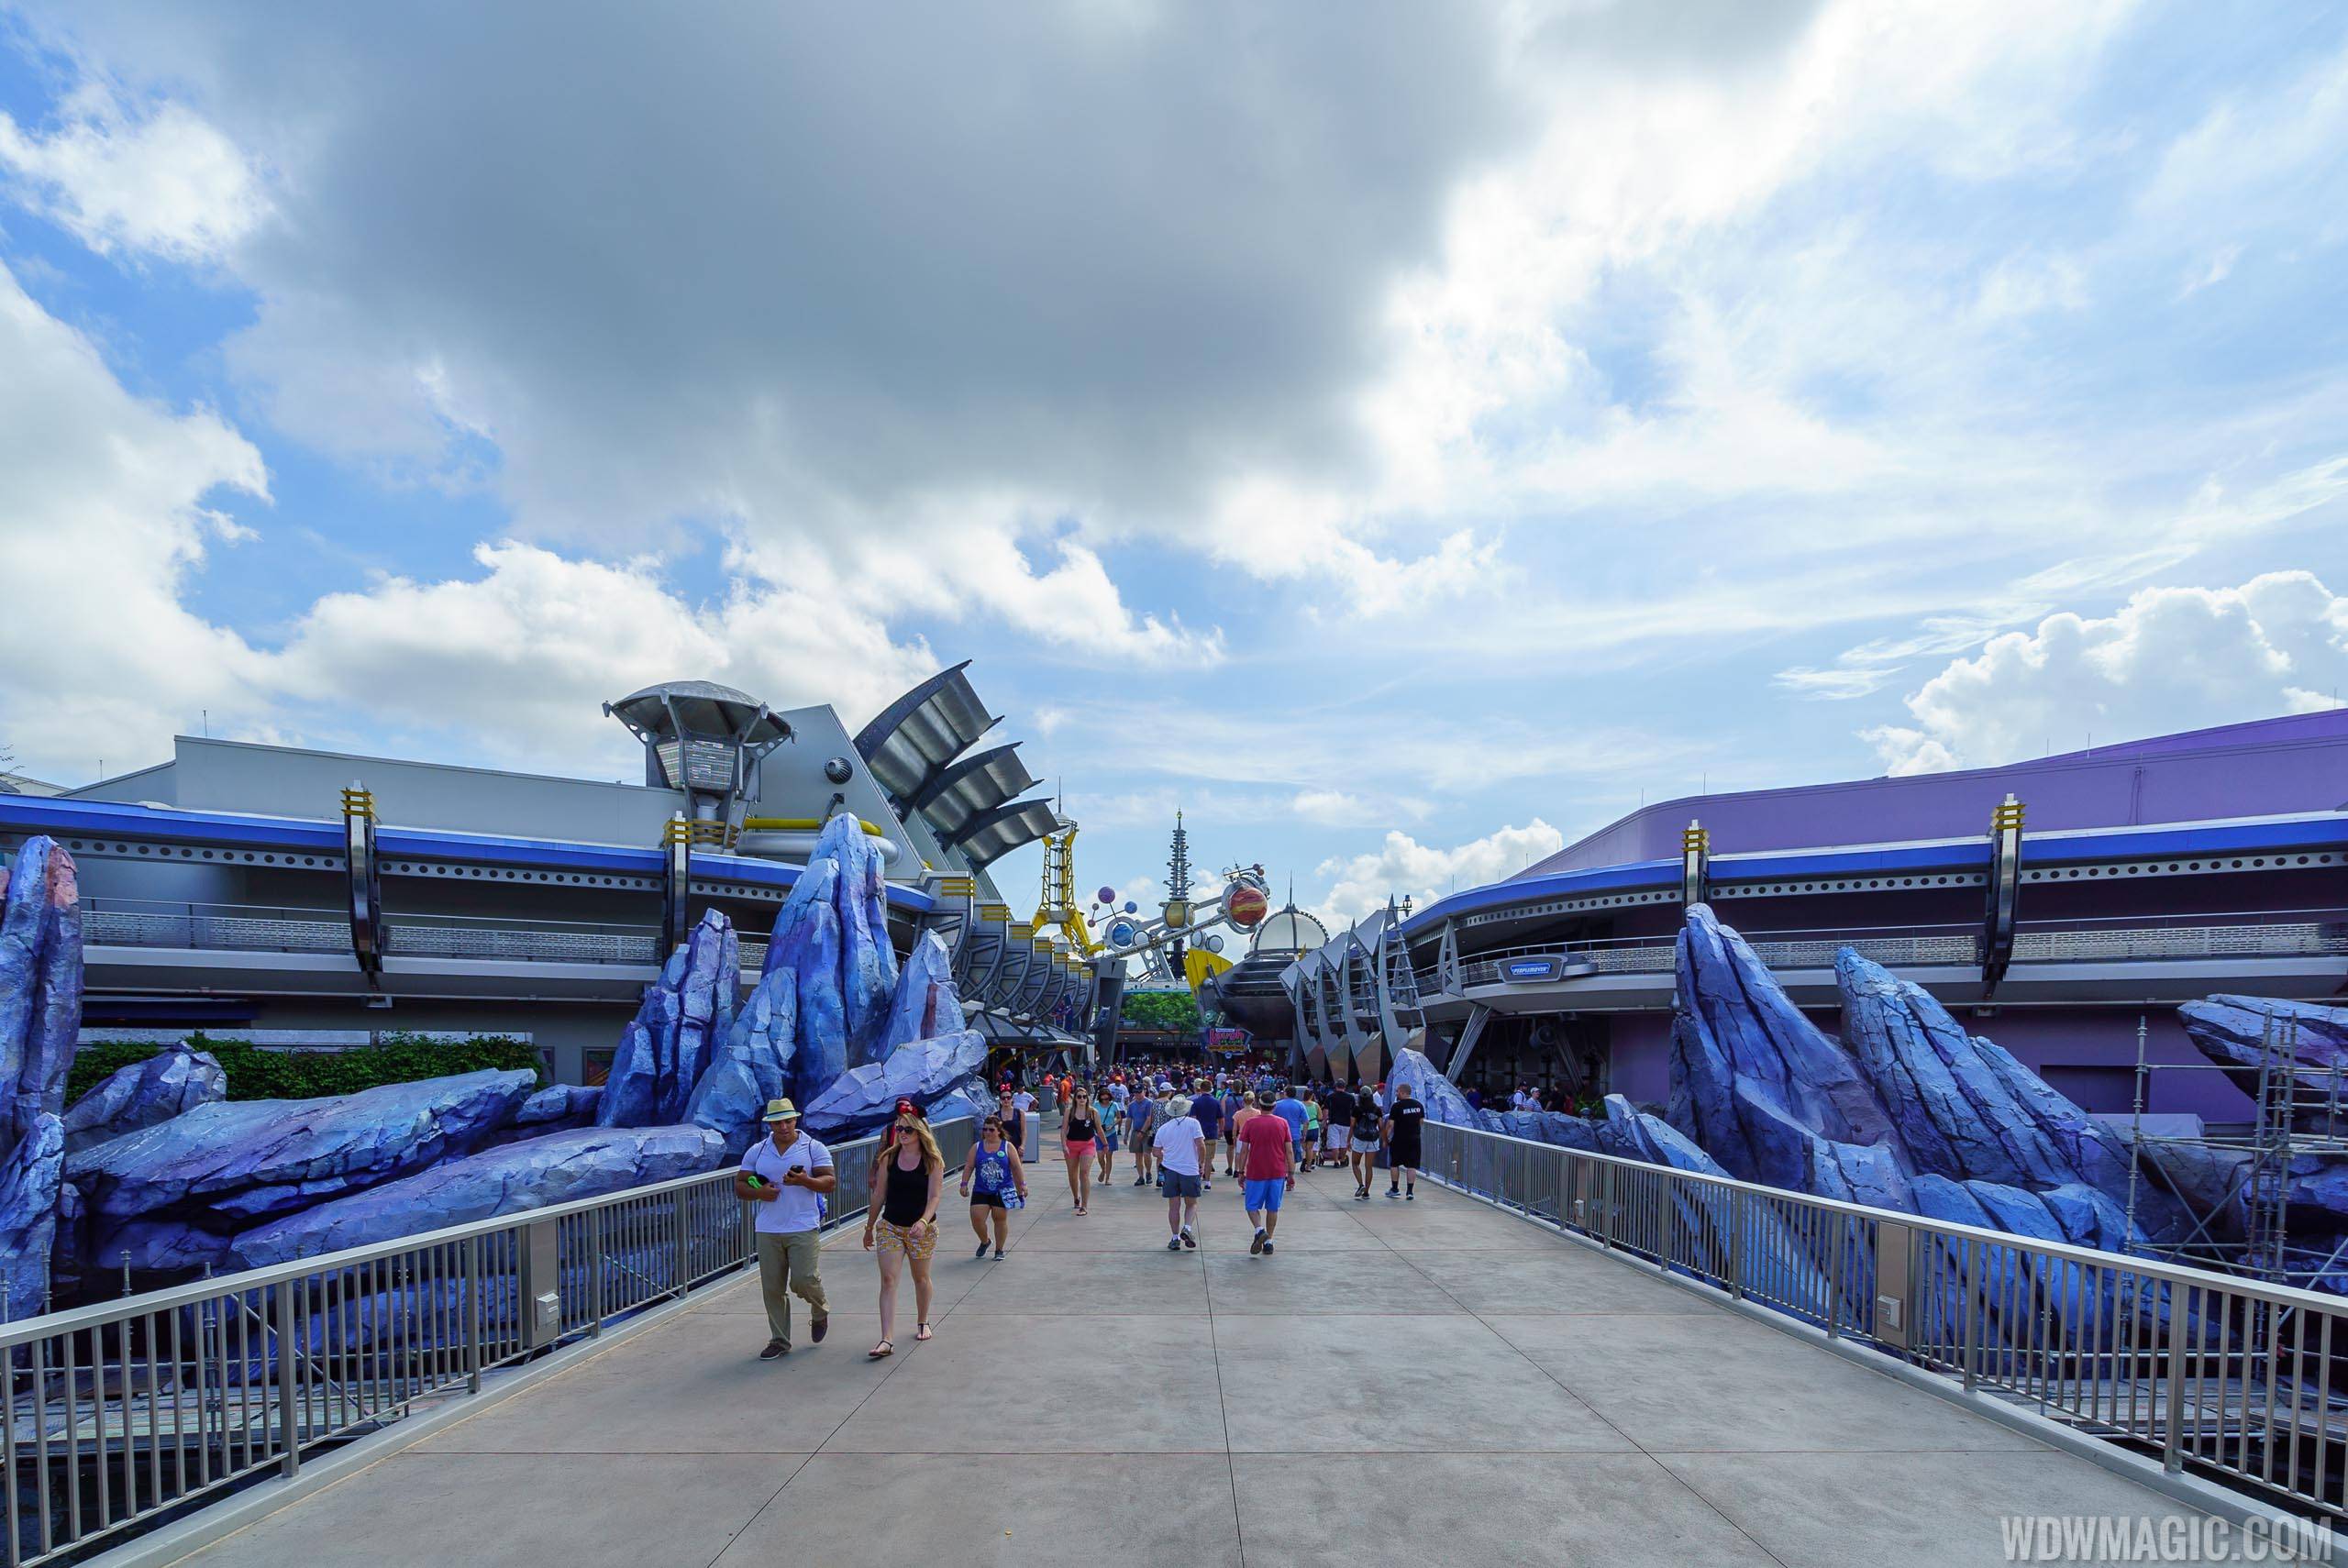 PHOTOS - Both sides of Tomorrowland entrance rock-work updated with new color